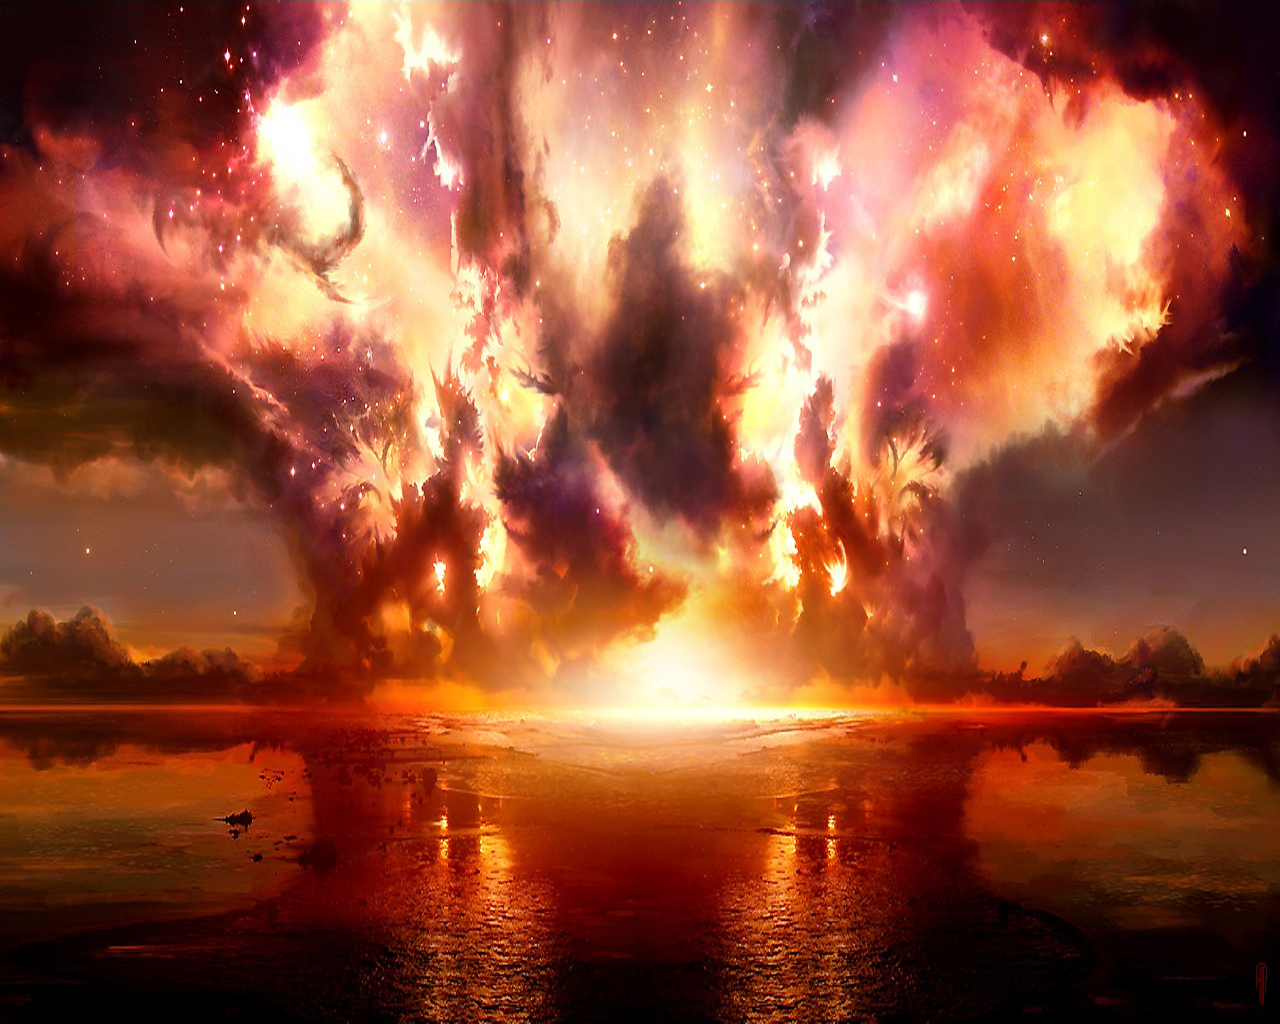 Explosion Res: 1280x1024 / Size:838kb. Views: 75092. More 3D & Digital Art Scene wallpapers